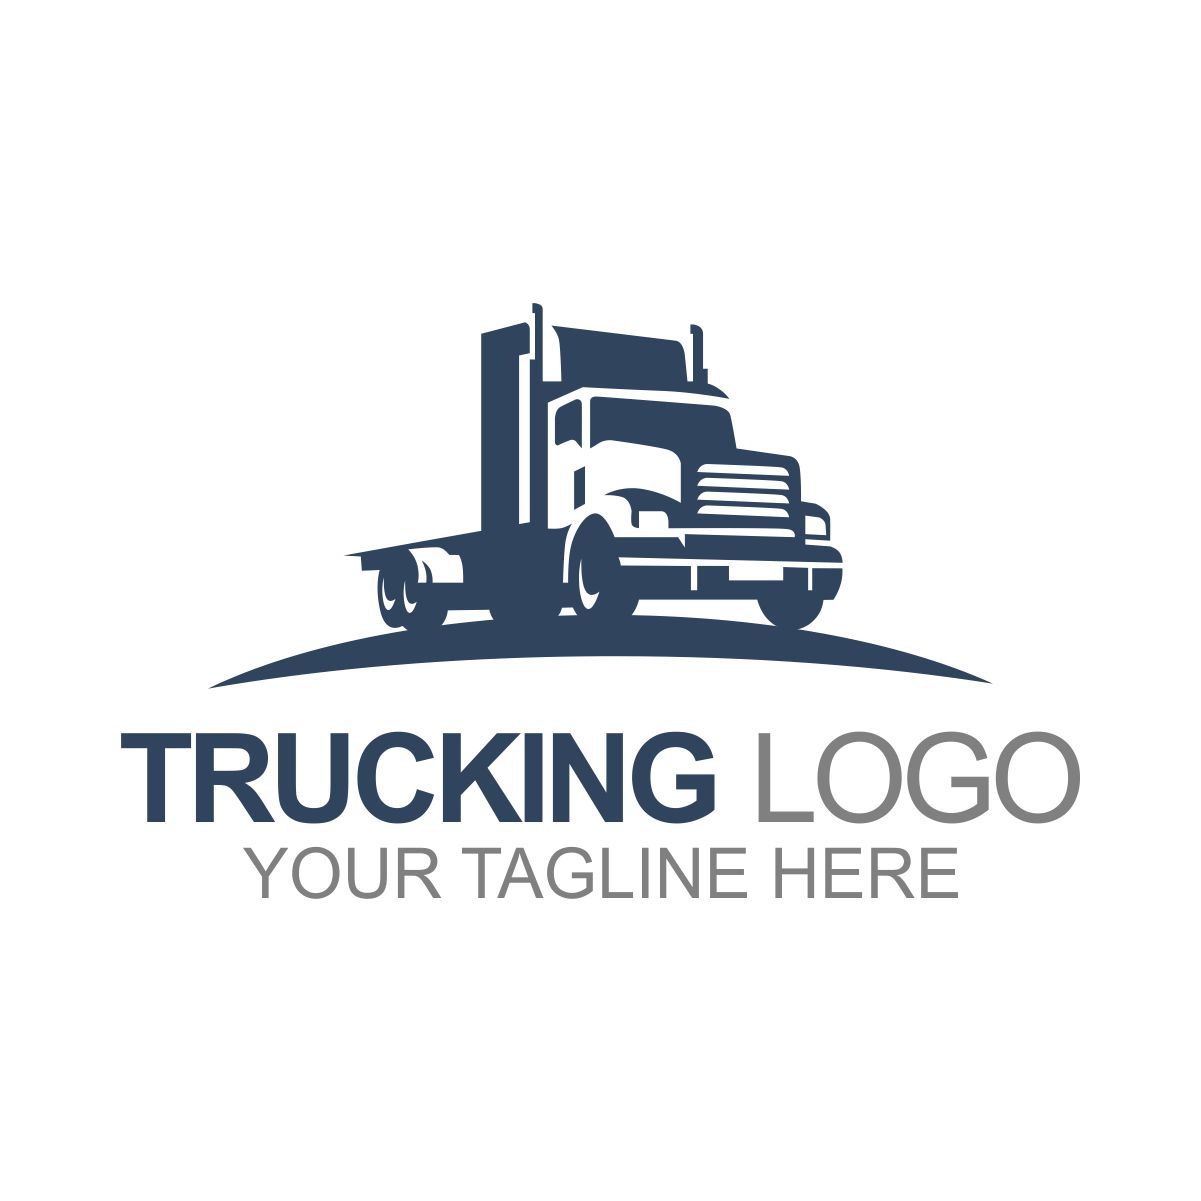 Trucking Logo by Dheograft | Codester